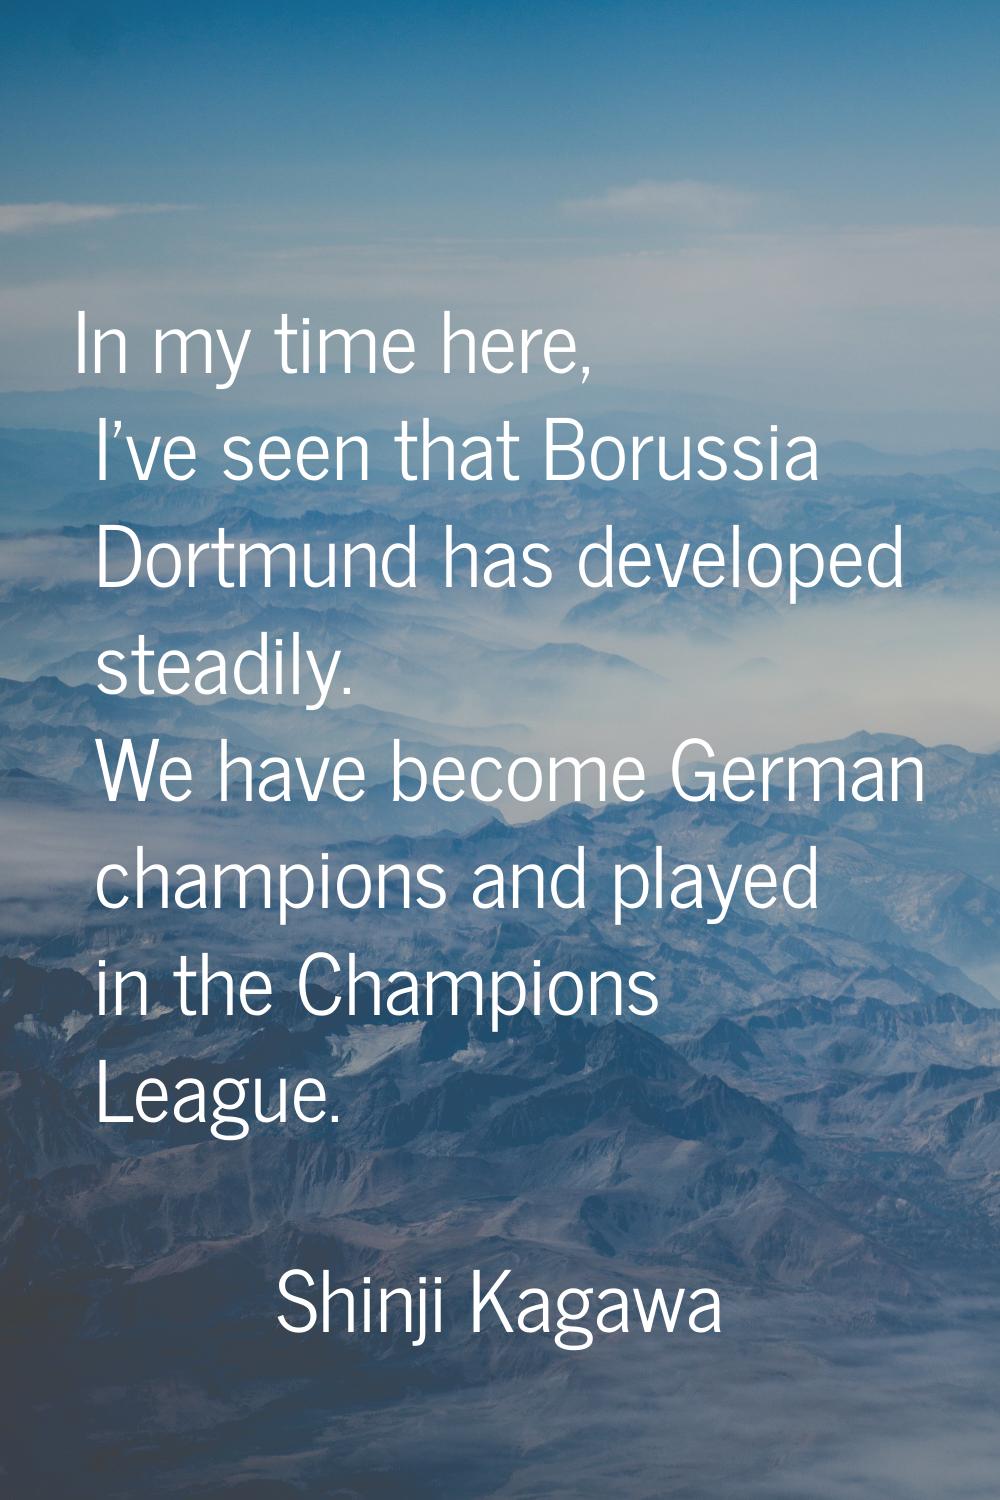 In my time here, I've seen that Borussia Dortmund has developed steadily. We have become German cha